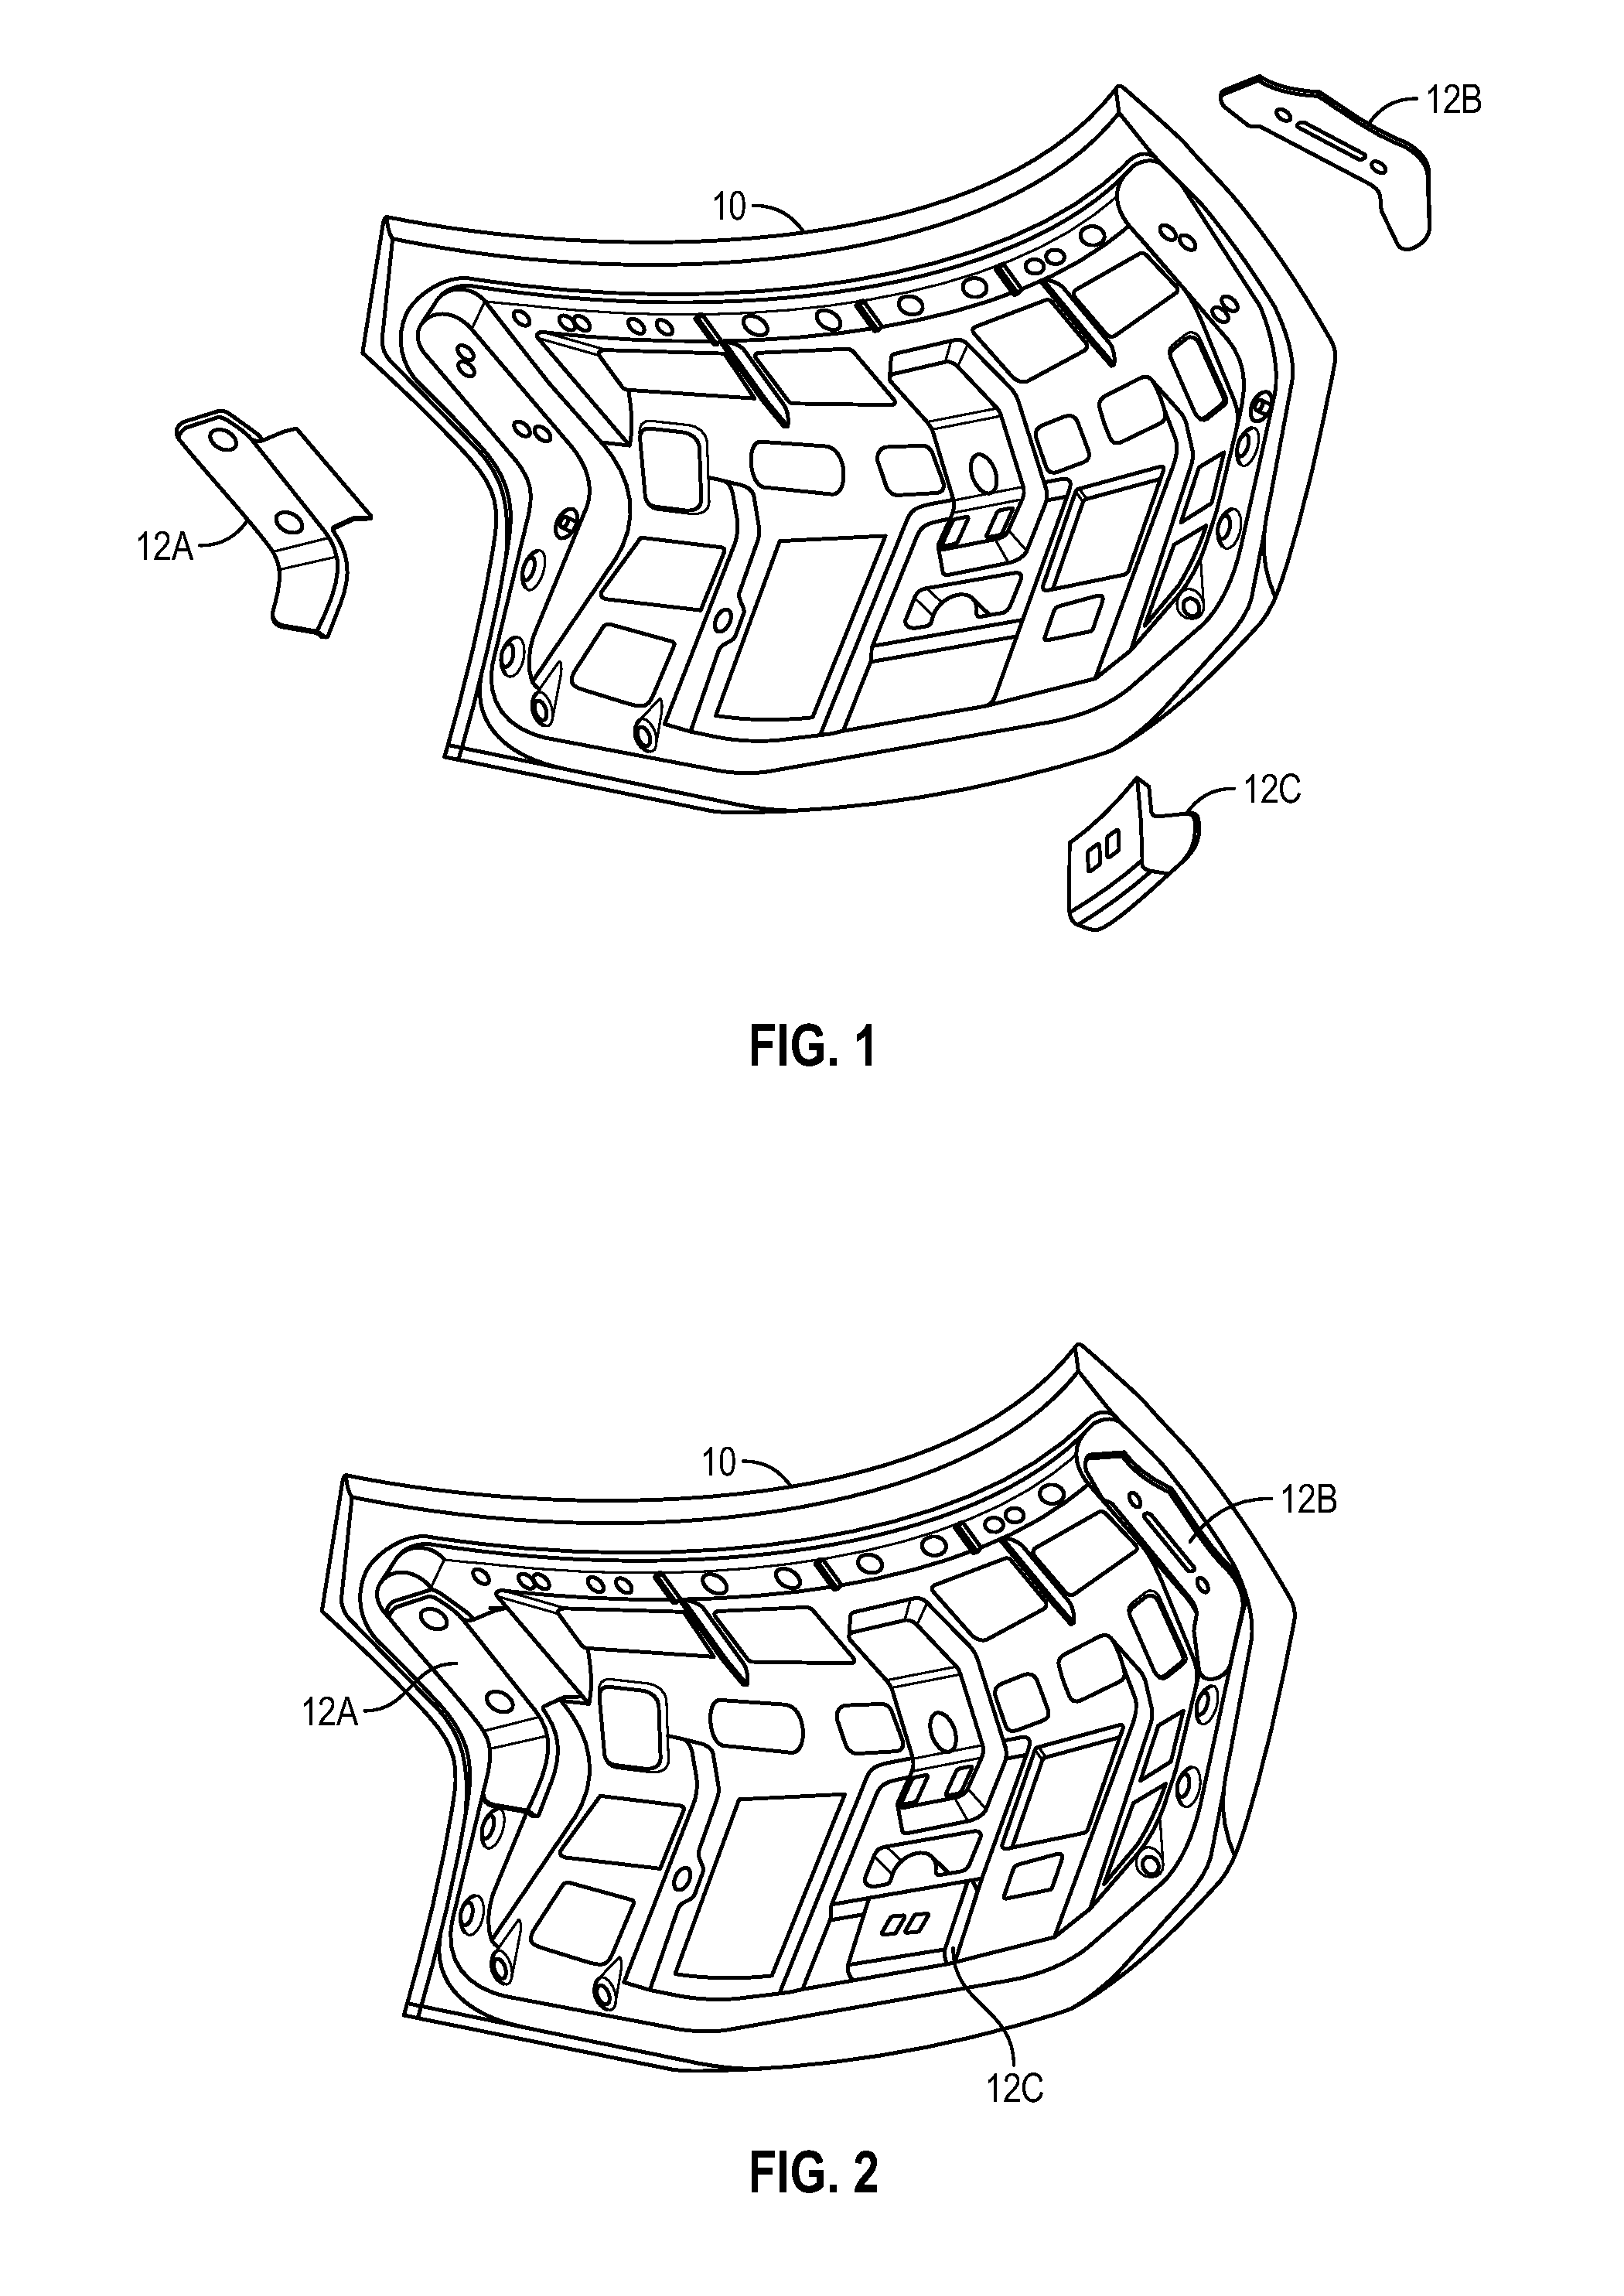 System and method for fixtureless component location in assembling components